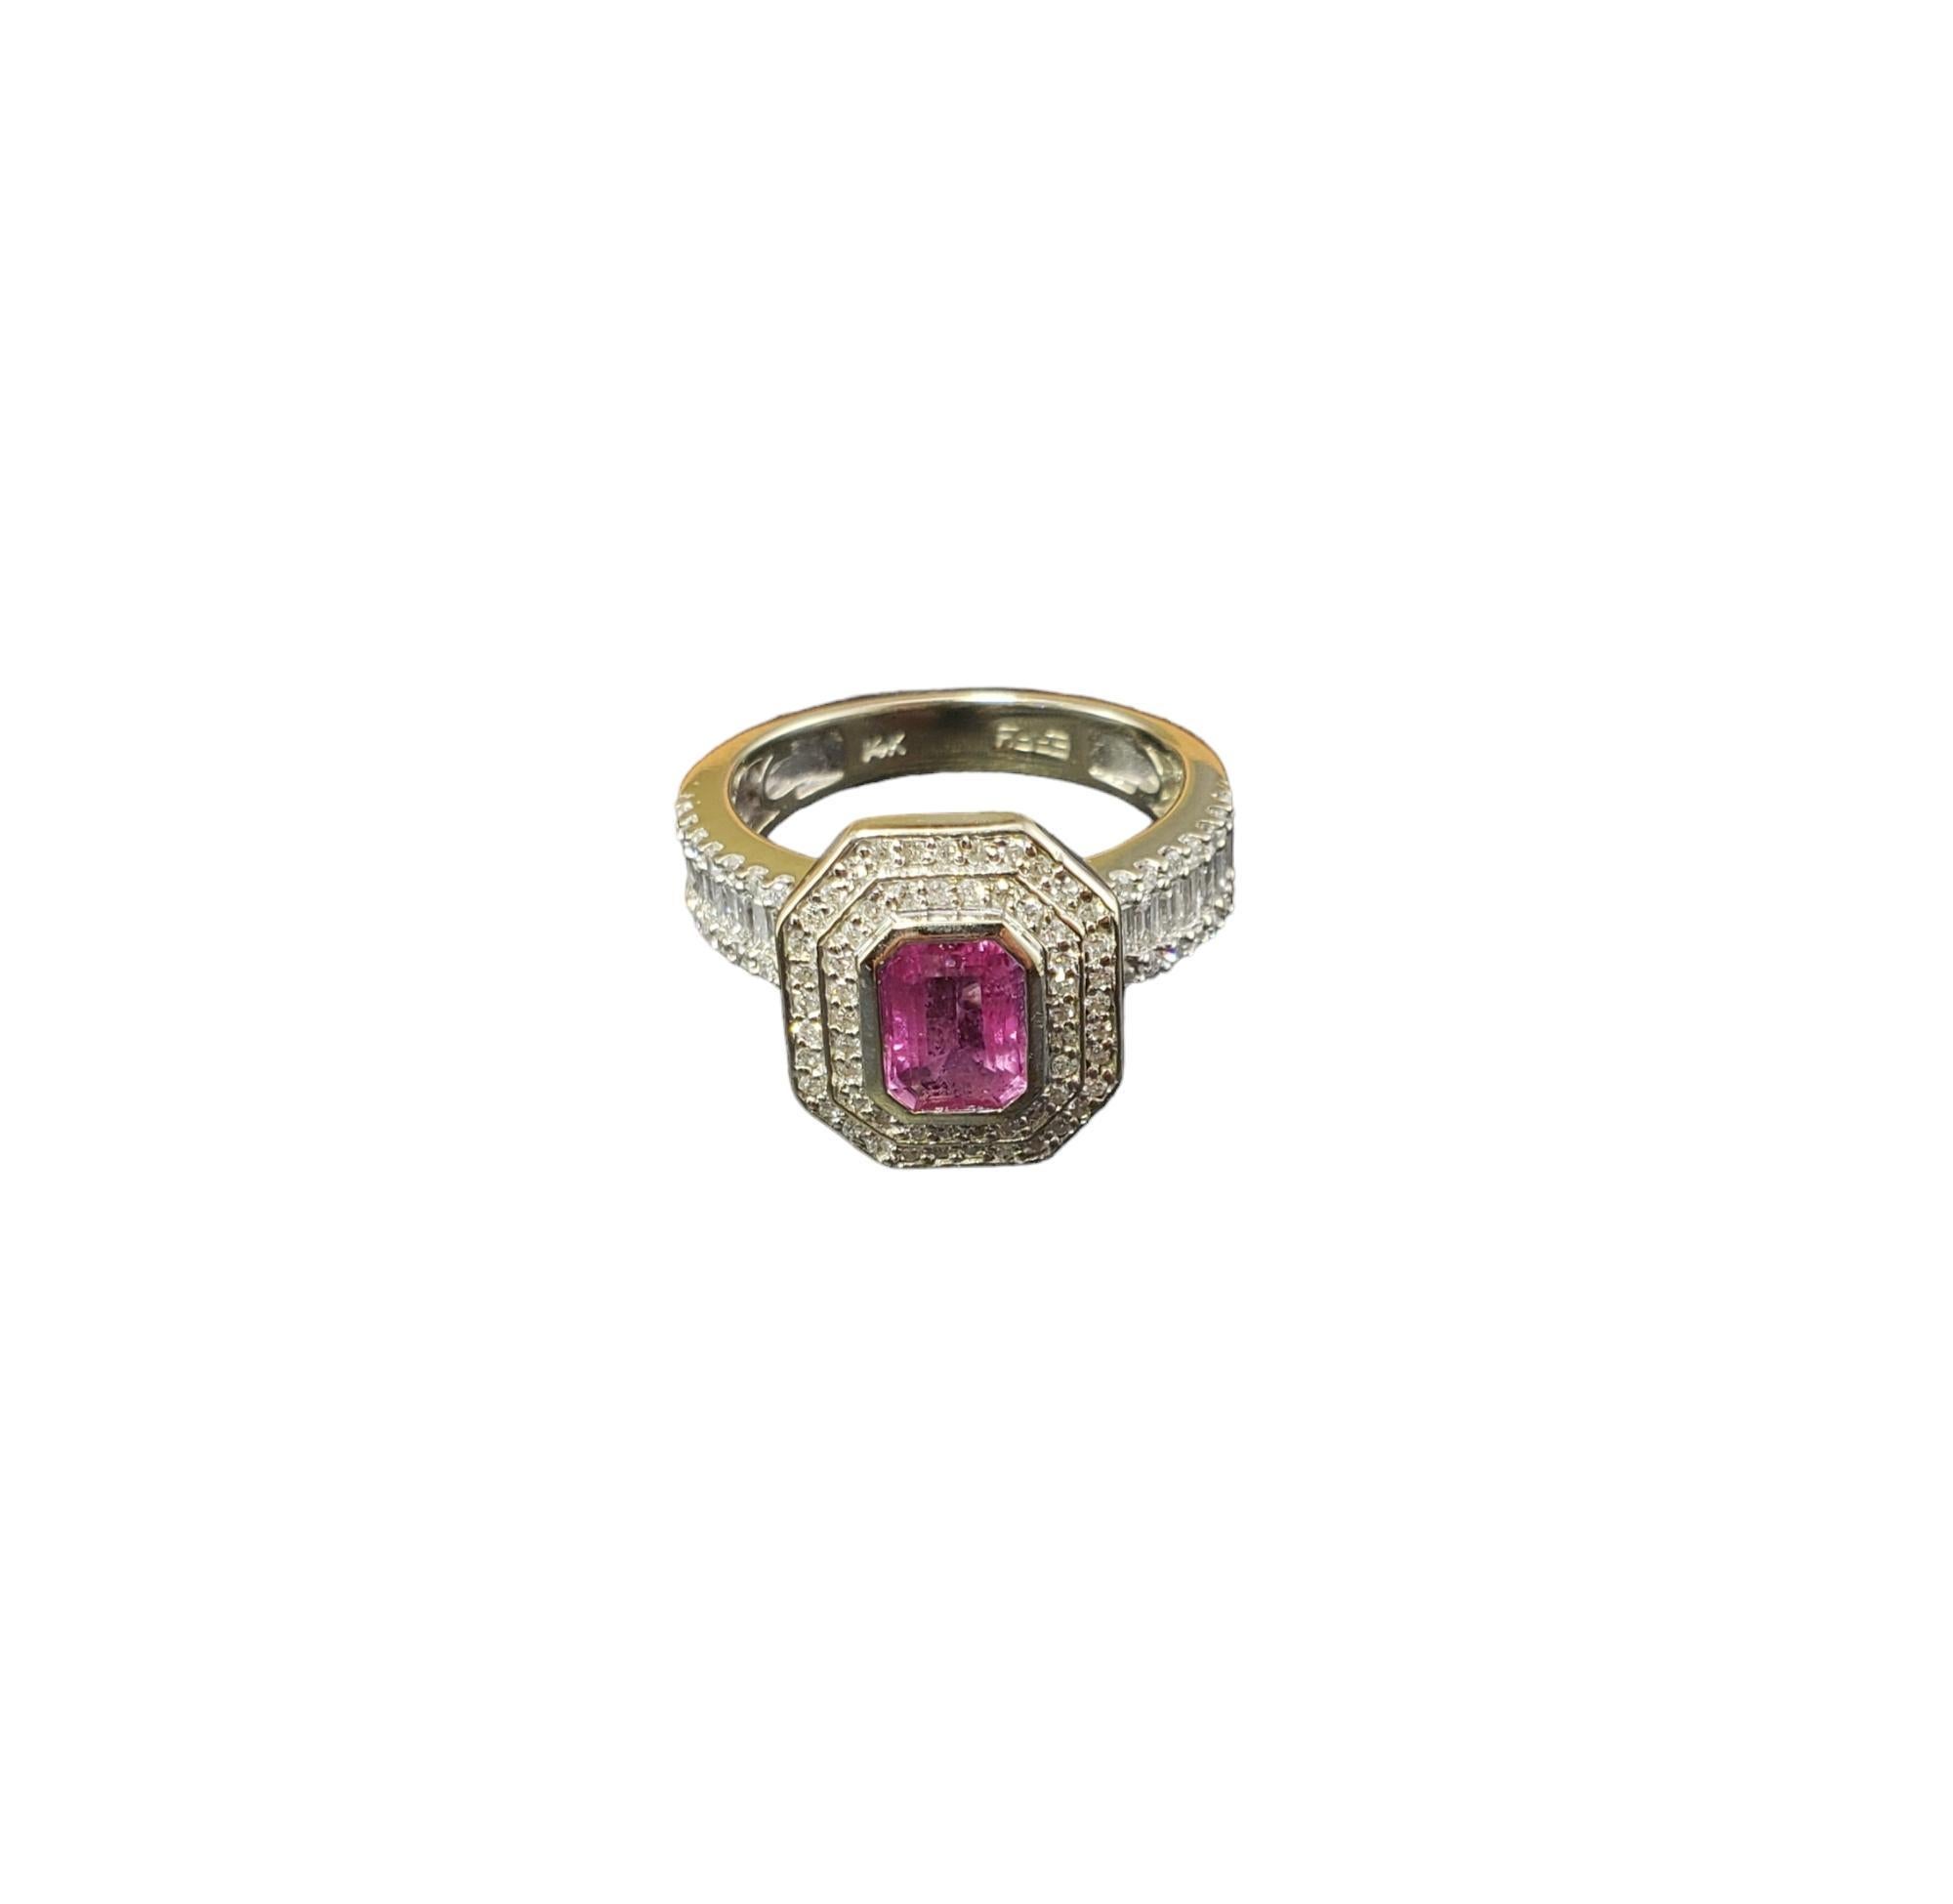 Vintage Effy 14K Yellow Gold Pink Sapphire and Diamond Ring Size 7 JAGi Certified-

This stunning ring features one emerald cut pink sapphire (6.9 mm x 5.2 mm), 18 baguette diamonds and 90 round brilliant cut diamonds set in classic 14K yellow gold.